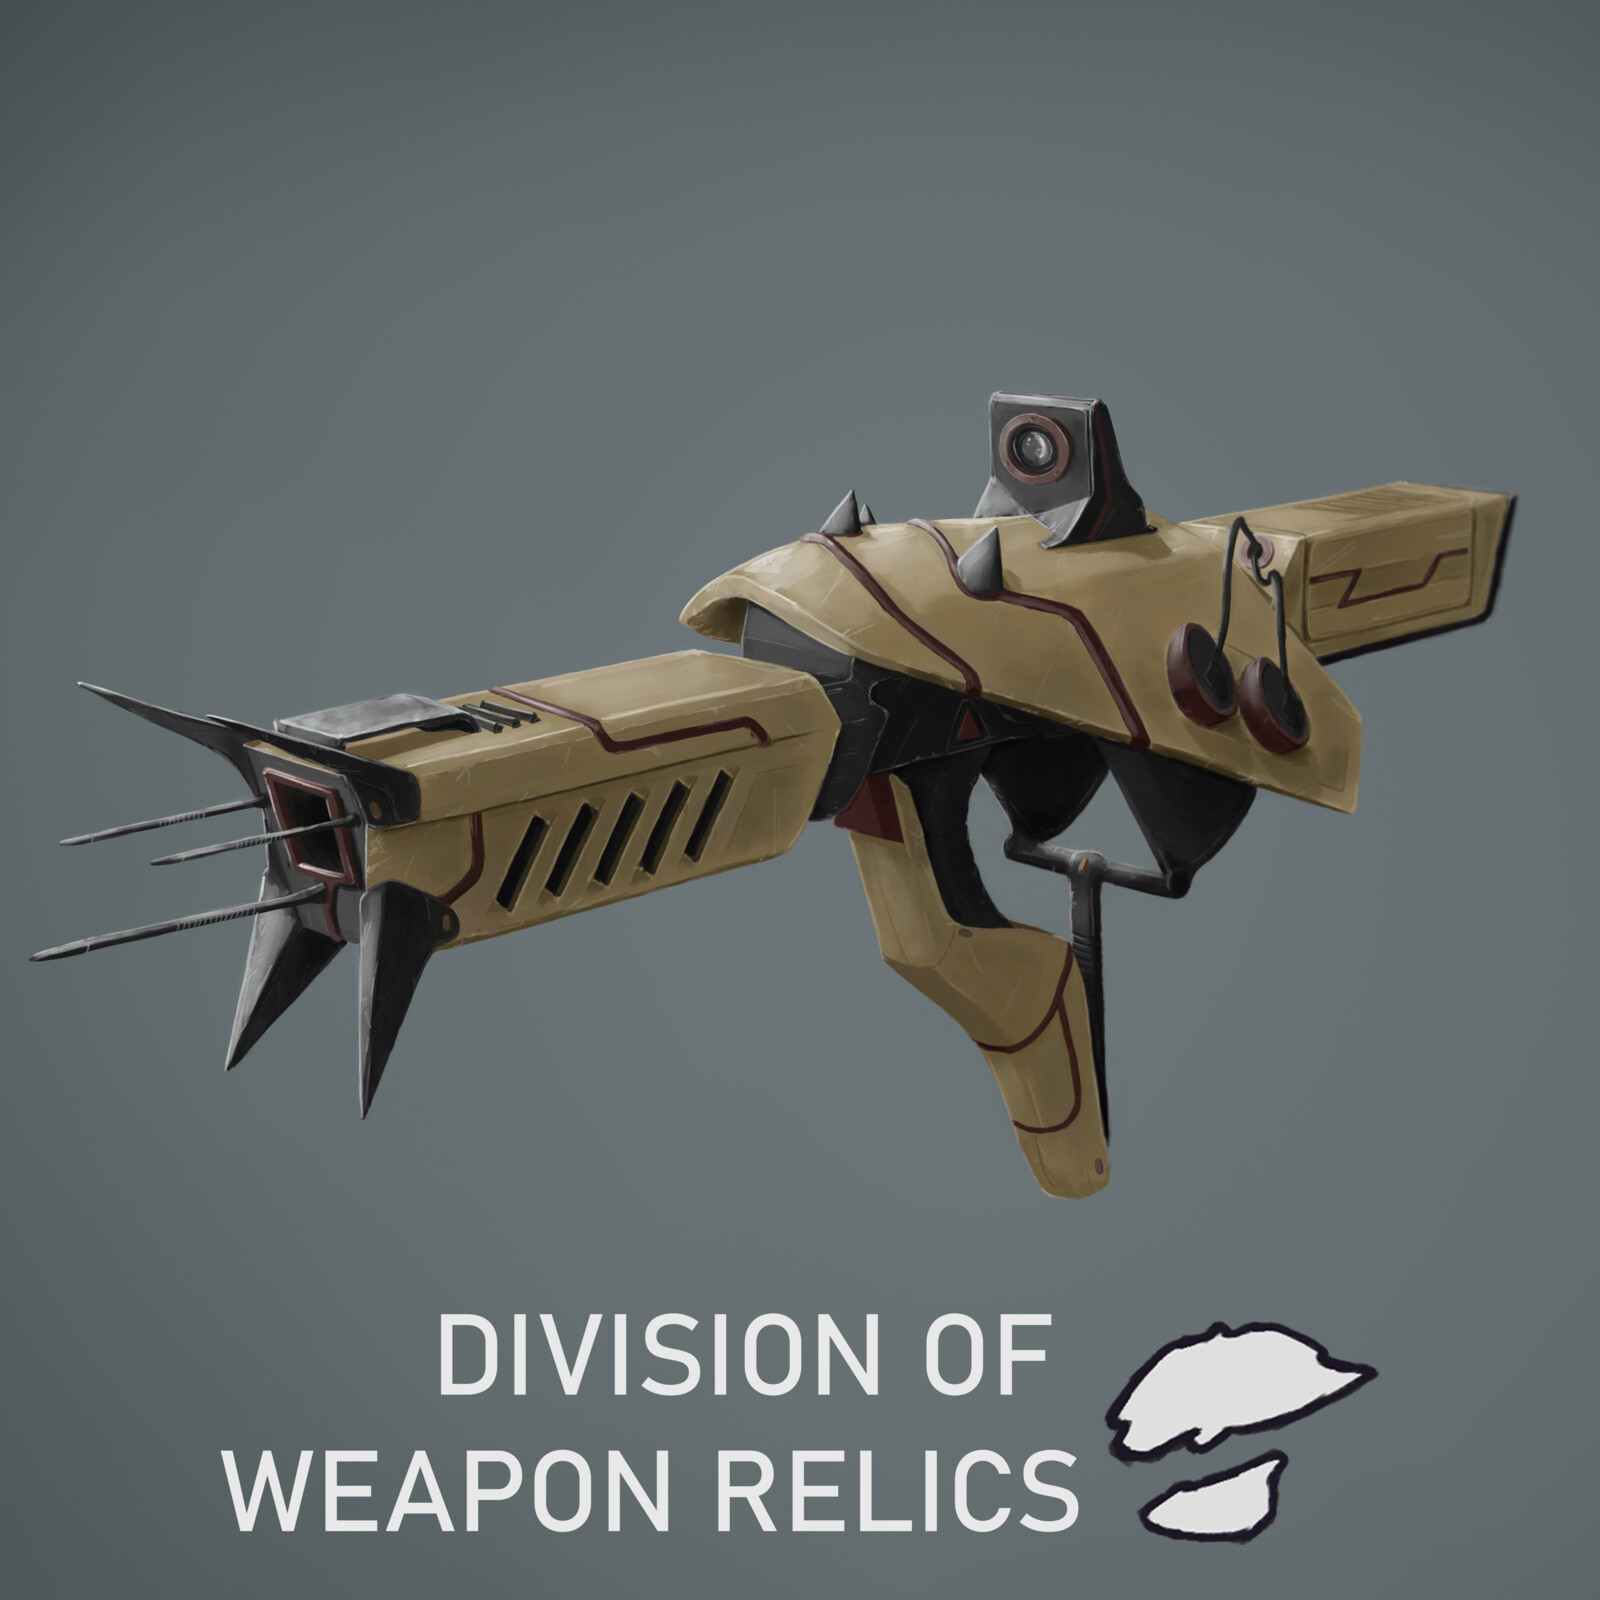 Division of Weapon Relics 2: PULSA EPR-S.S